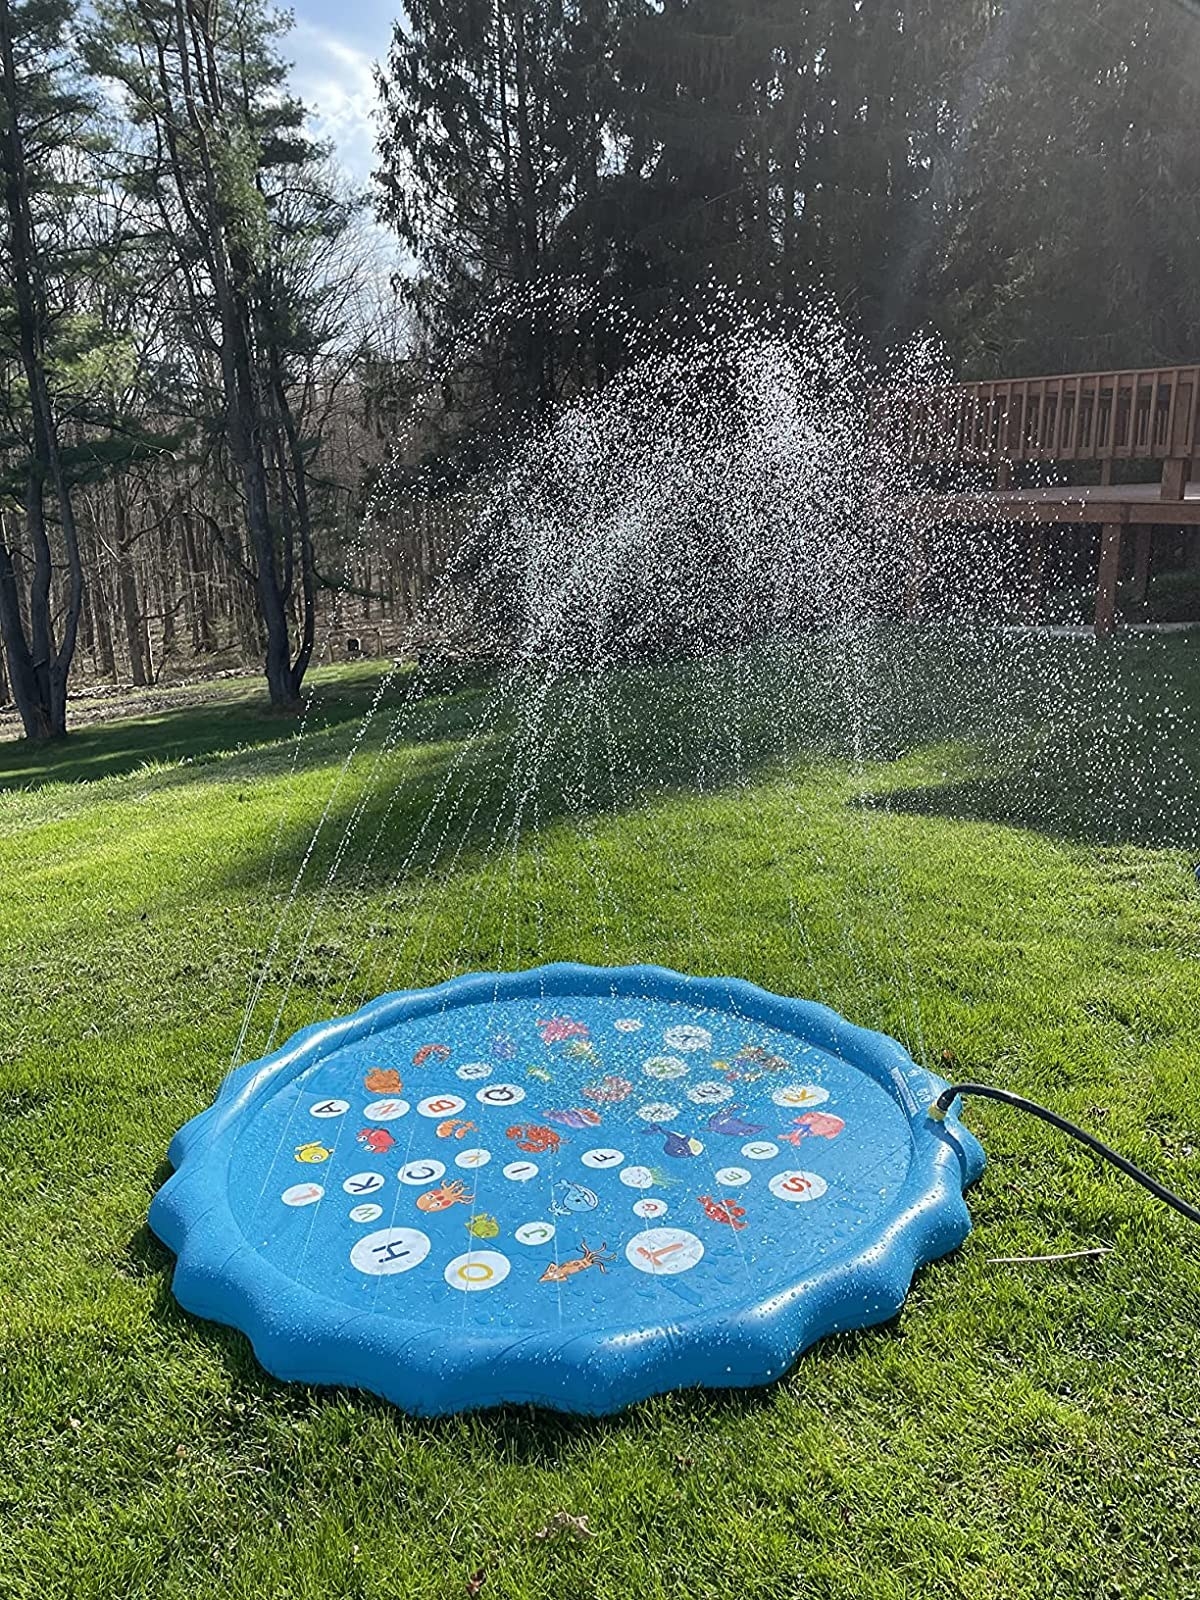 reviewer's photo of the splash pad with the water spraying out